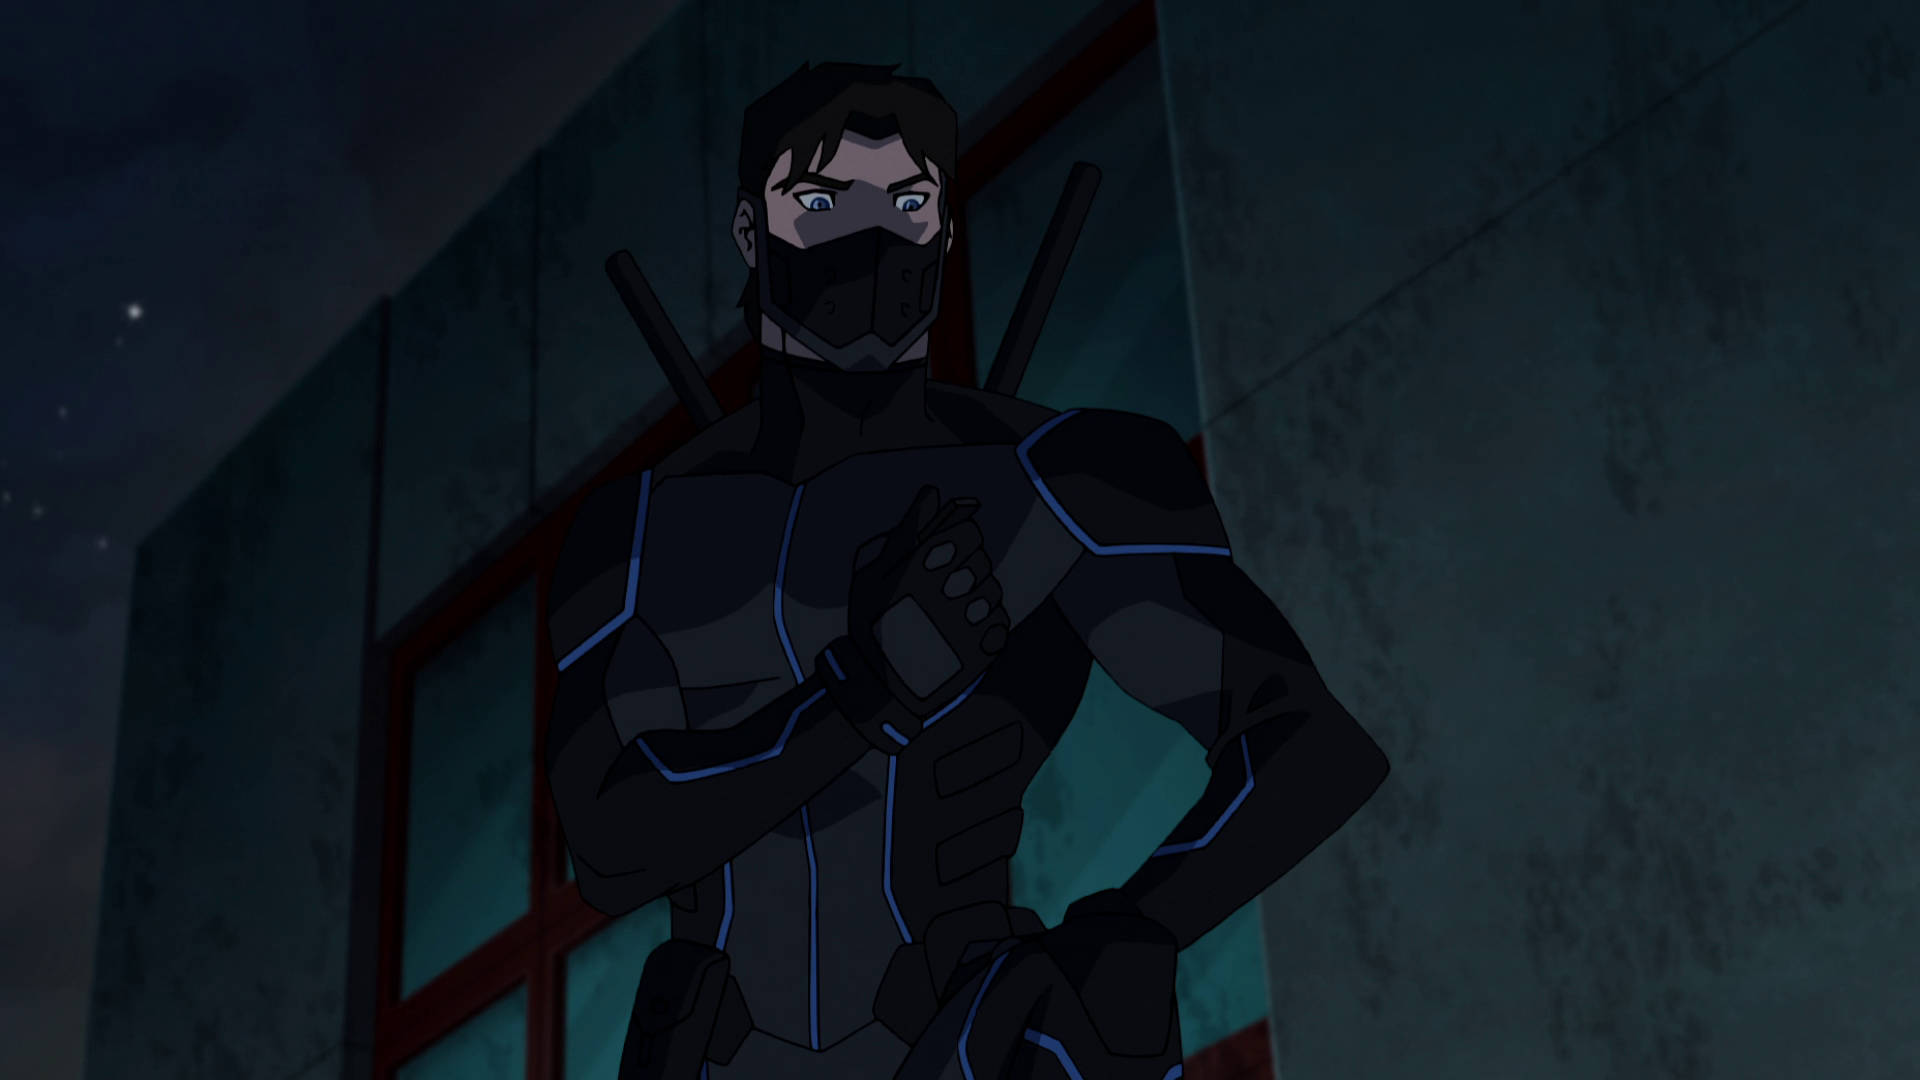 Young Justice Nightwing Stealth Suit Wallpaper